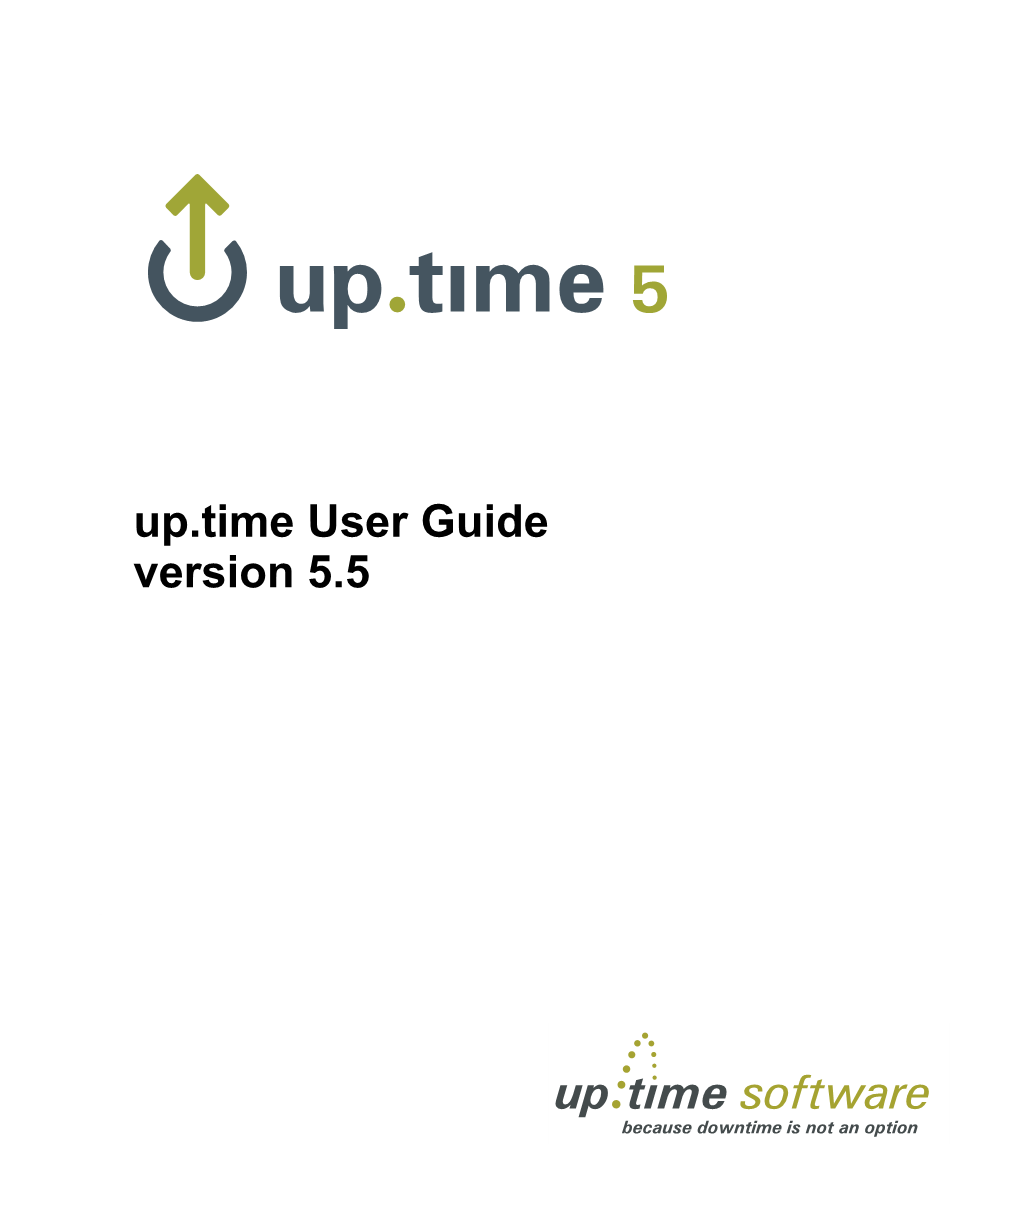 Up.Time 5 User Guide